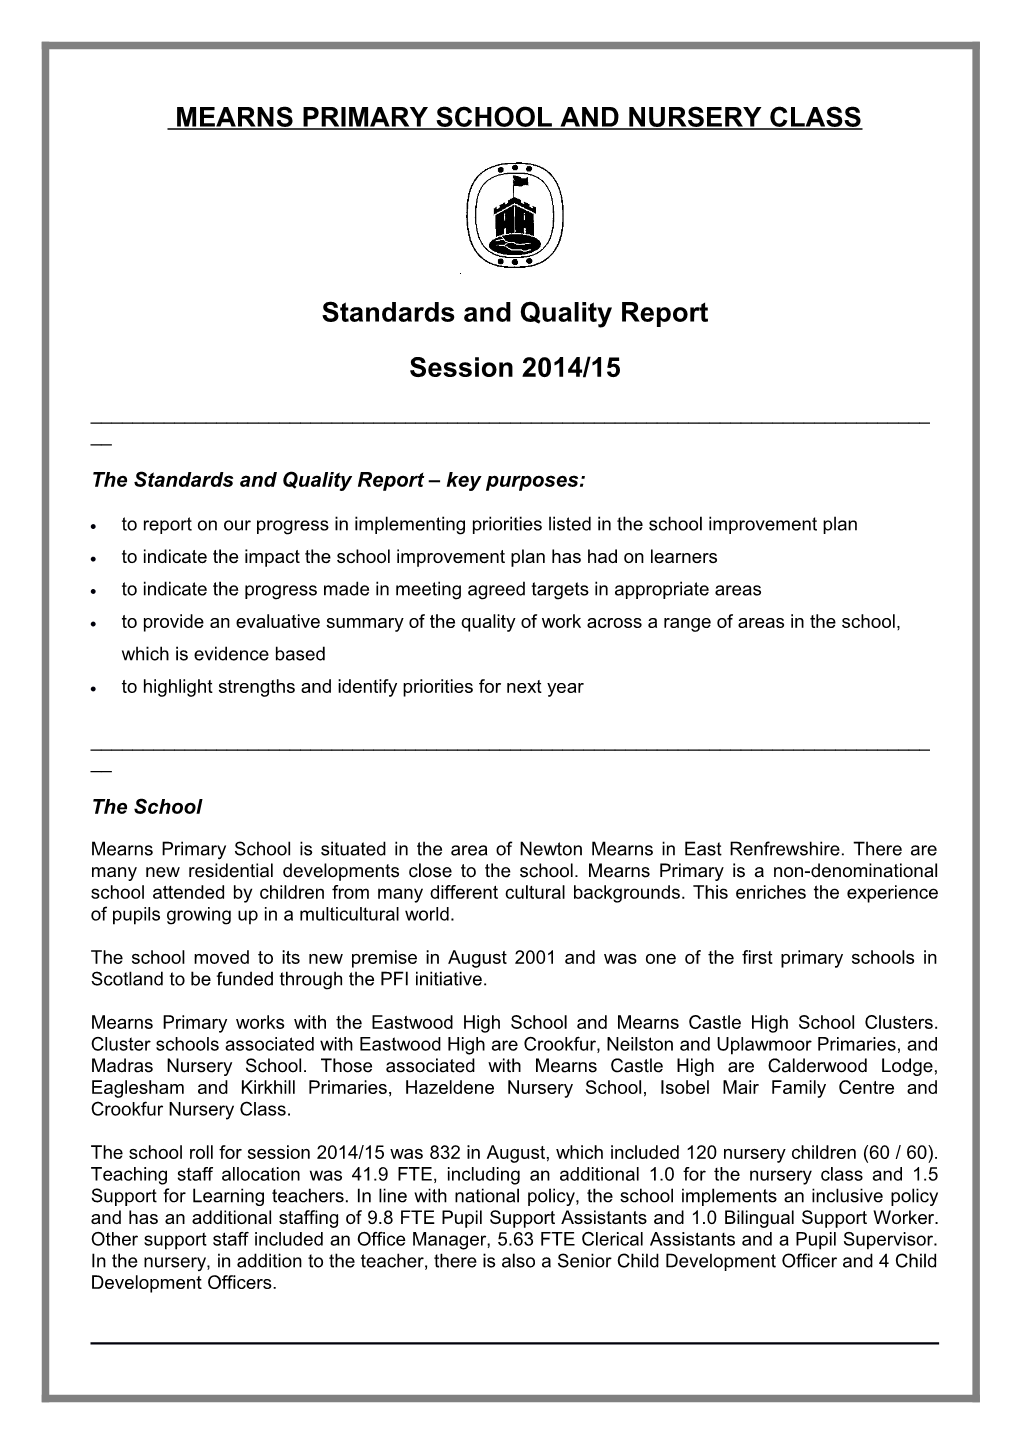 The Standards and Quality Report Key Purposes